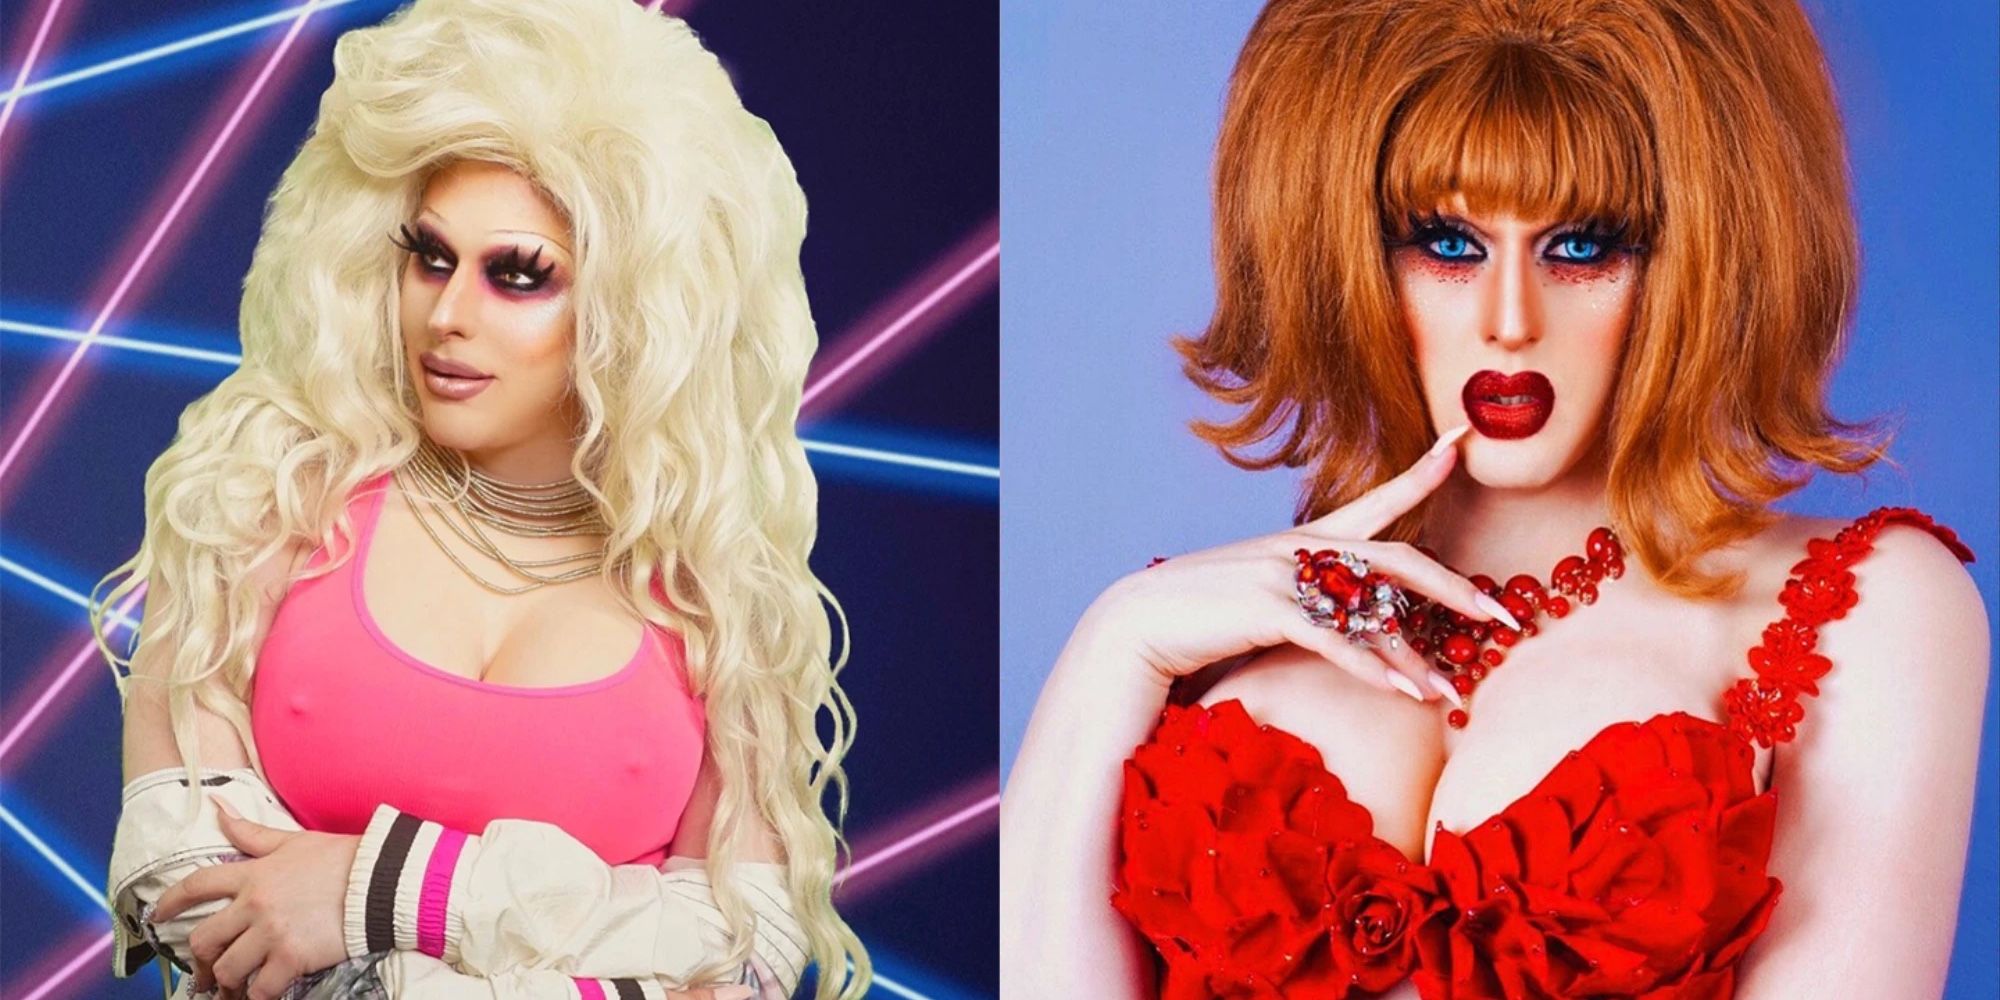 Two of Biqtch Puddin's looks